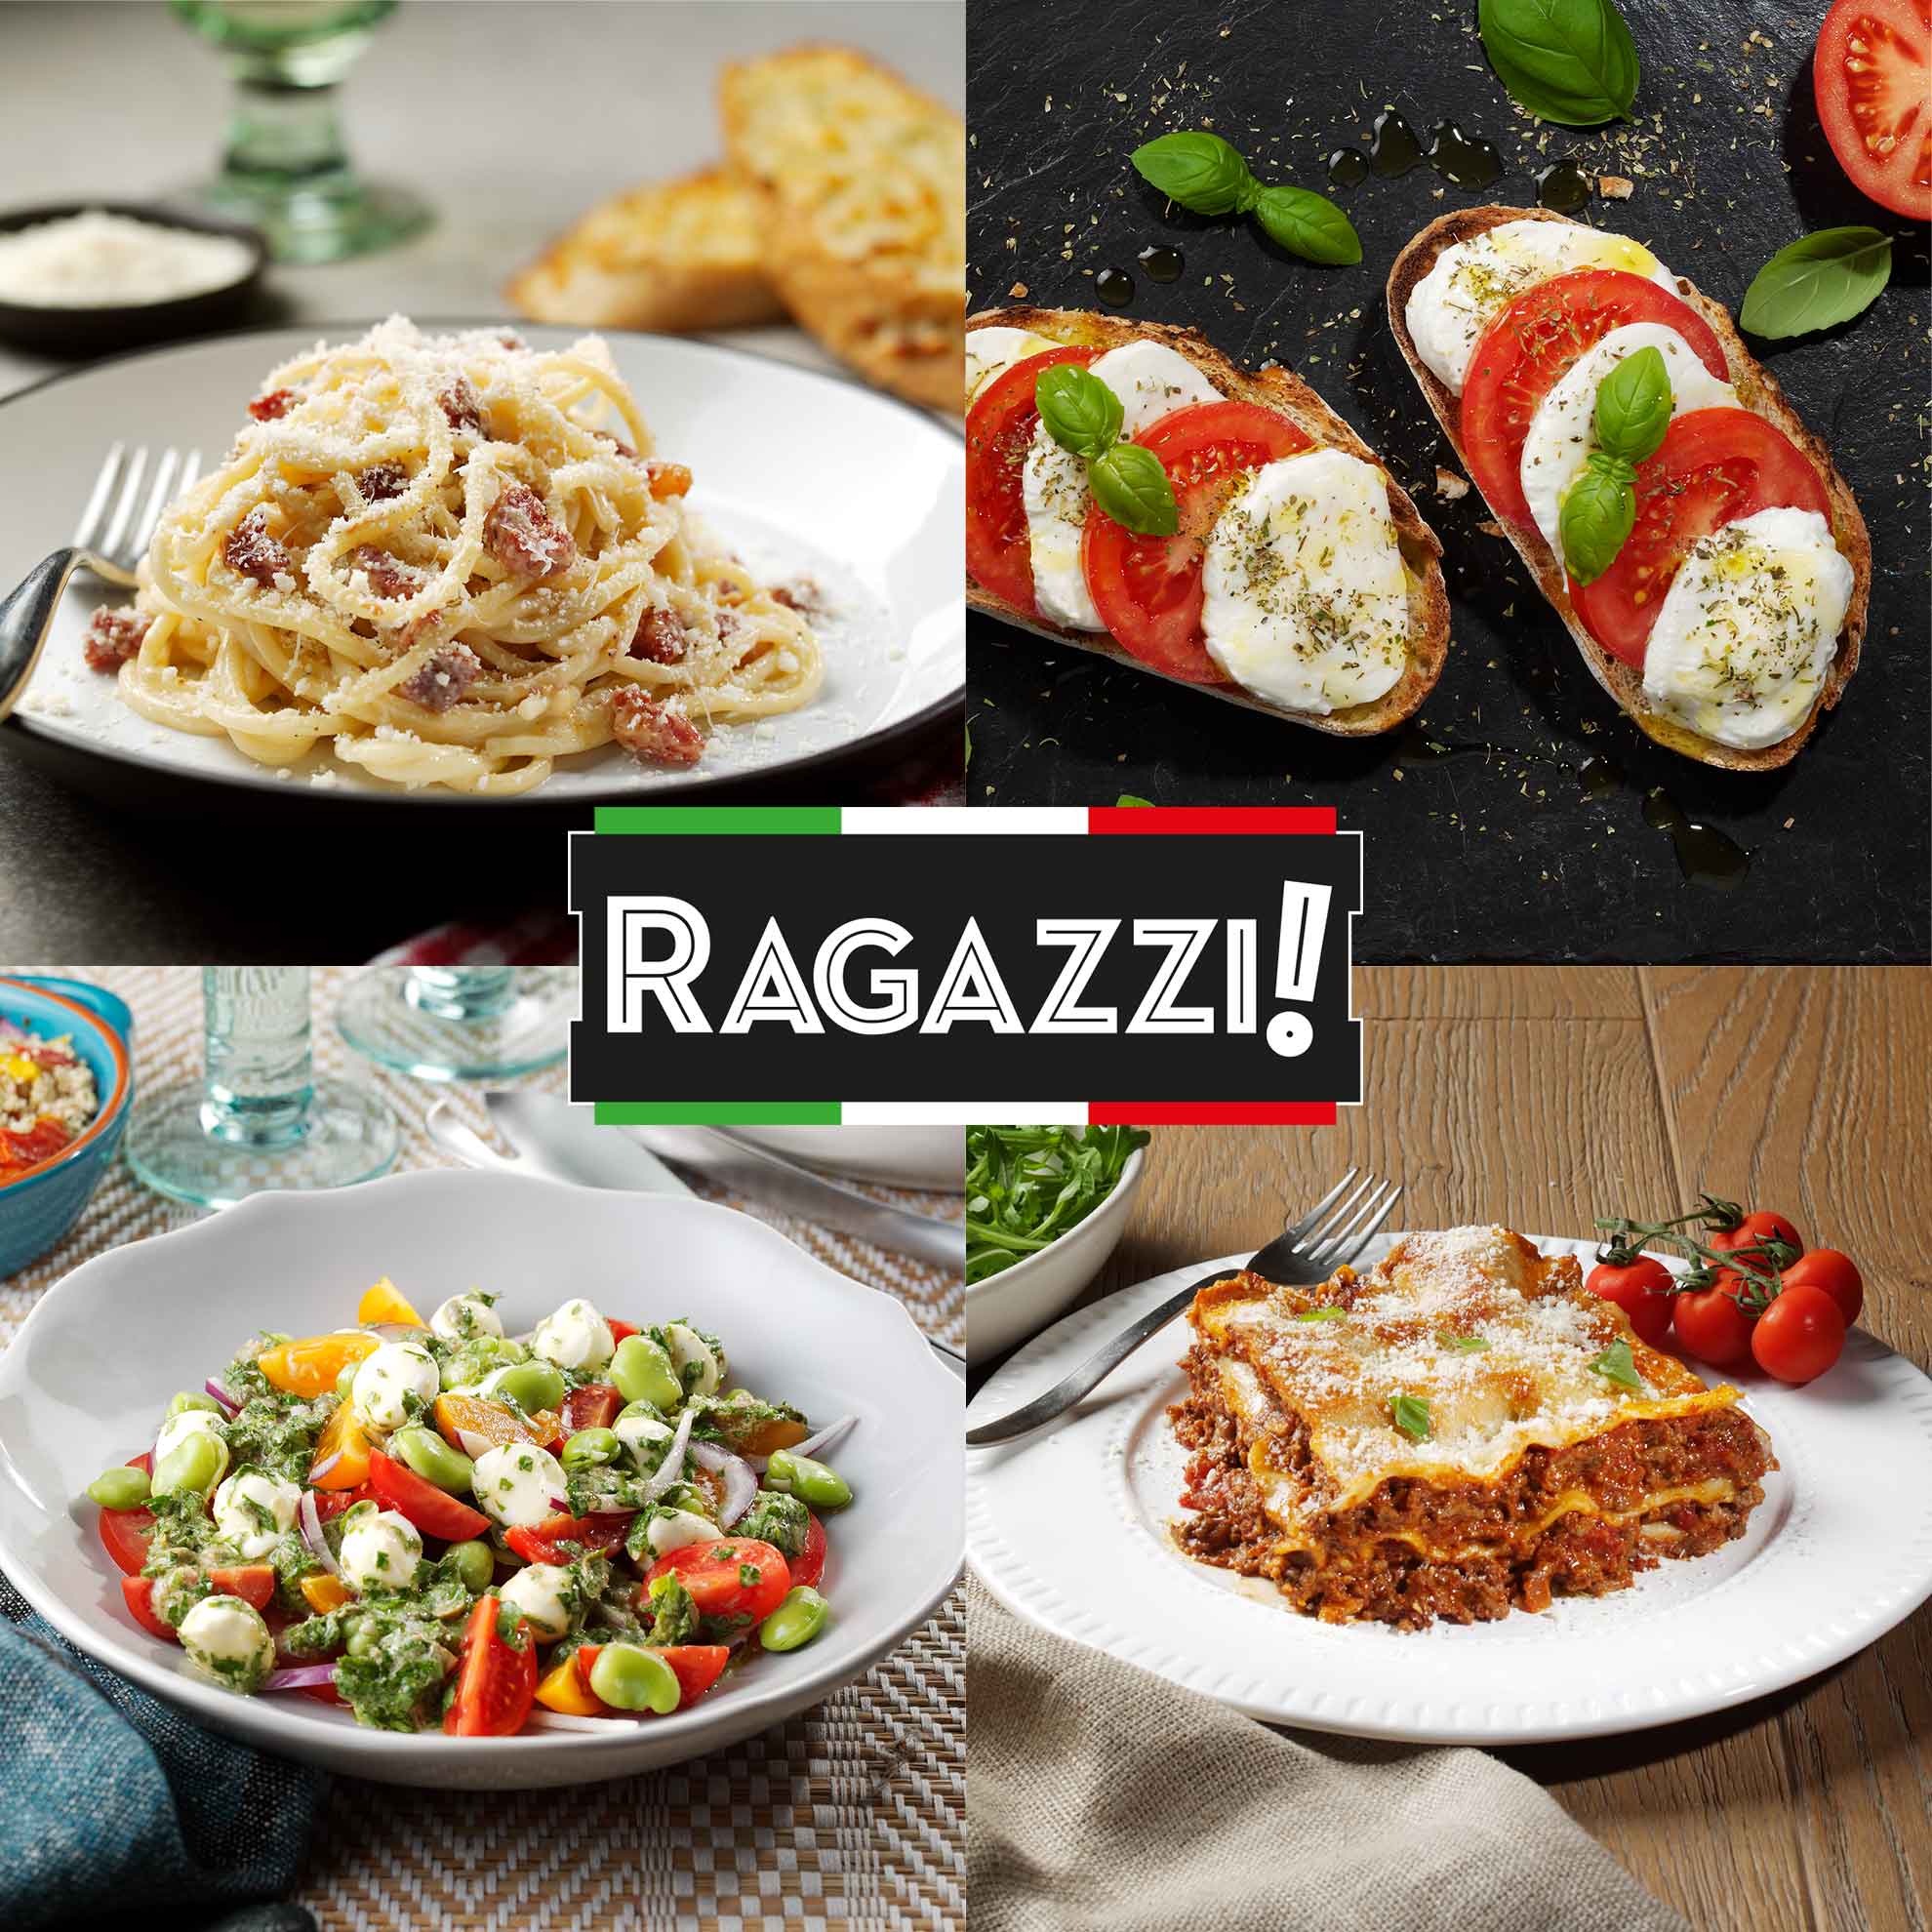 RAGAZZI! Italian cheese used in a variety of authentic recipes.